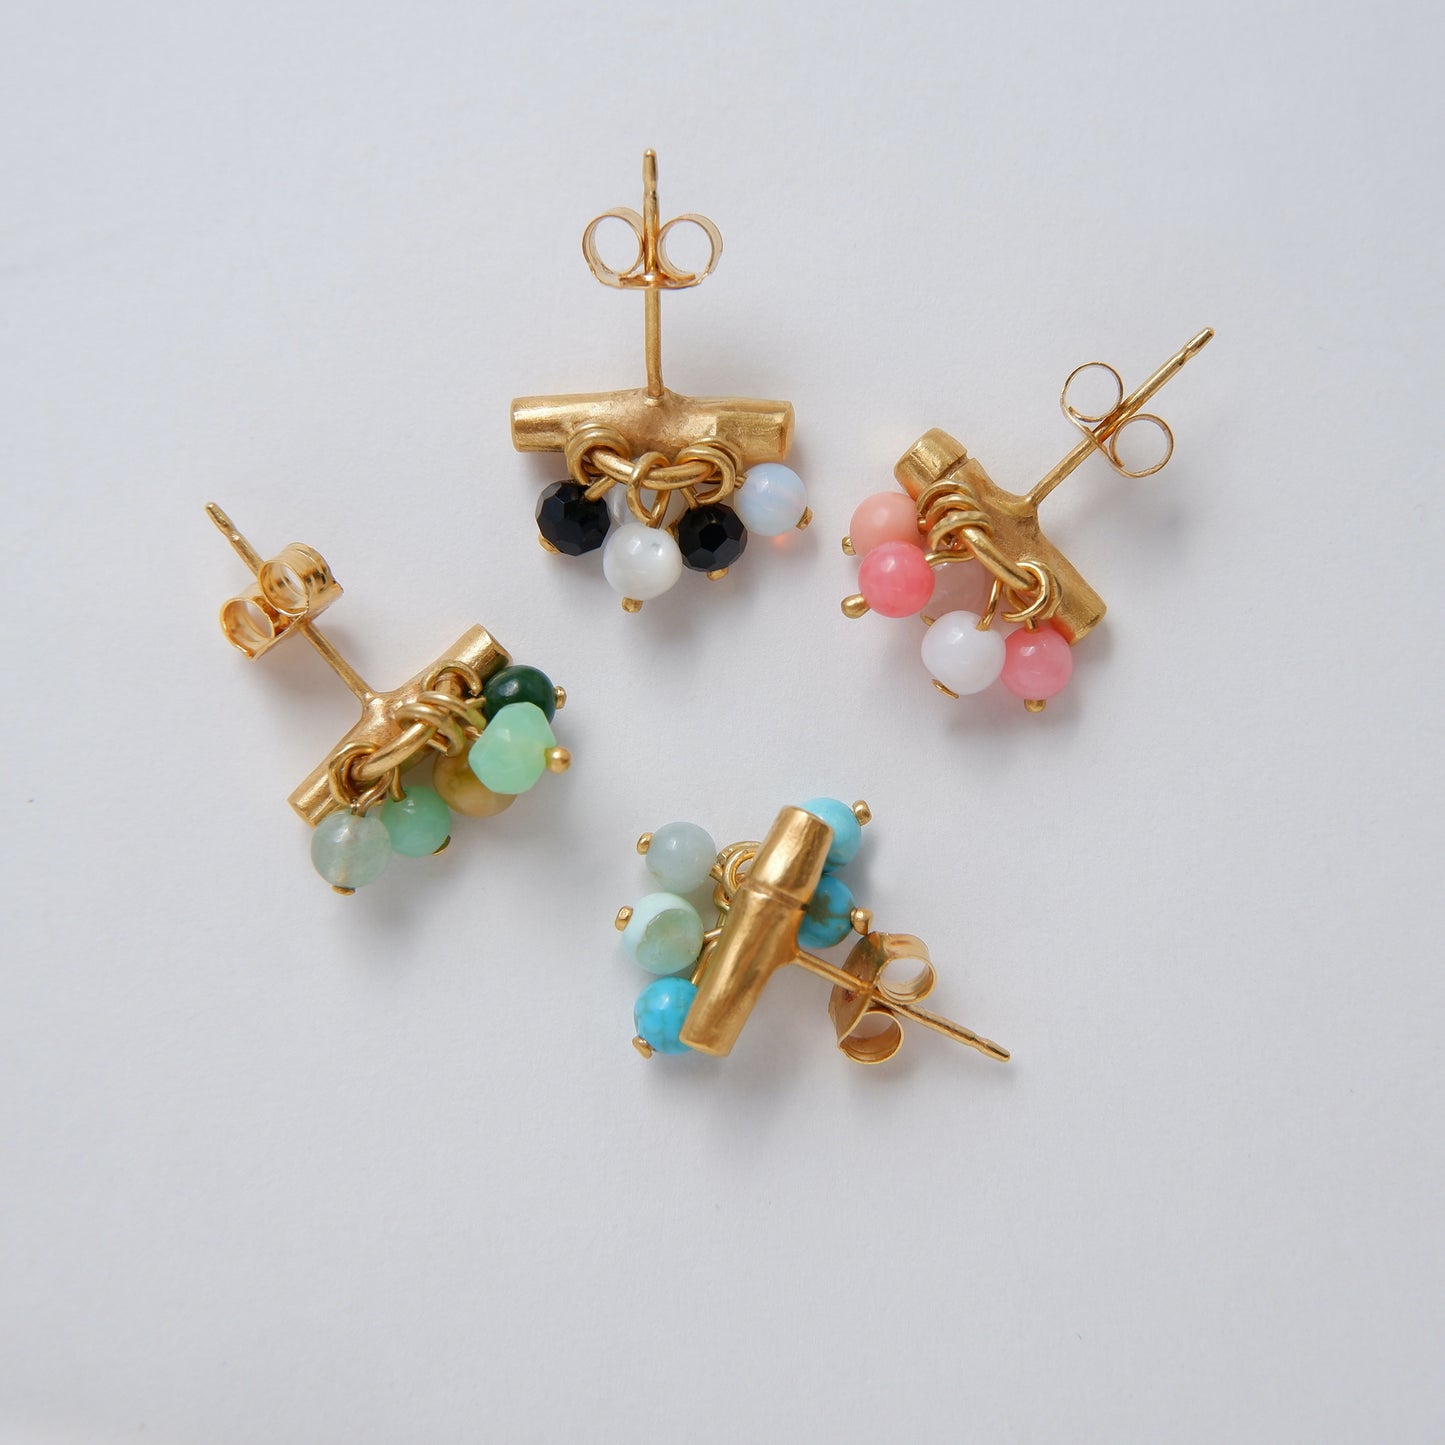 gold vermeil bamboo bar stud earrings with gemstone beads in green, pink, black & white, and green